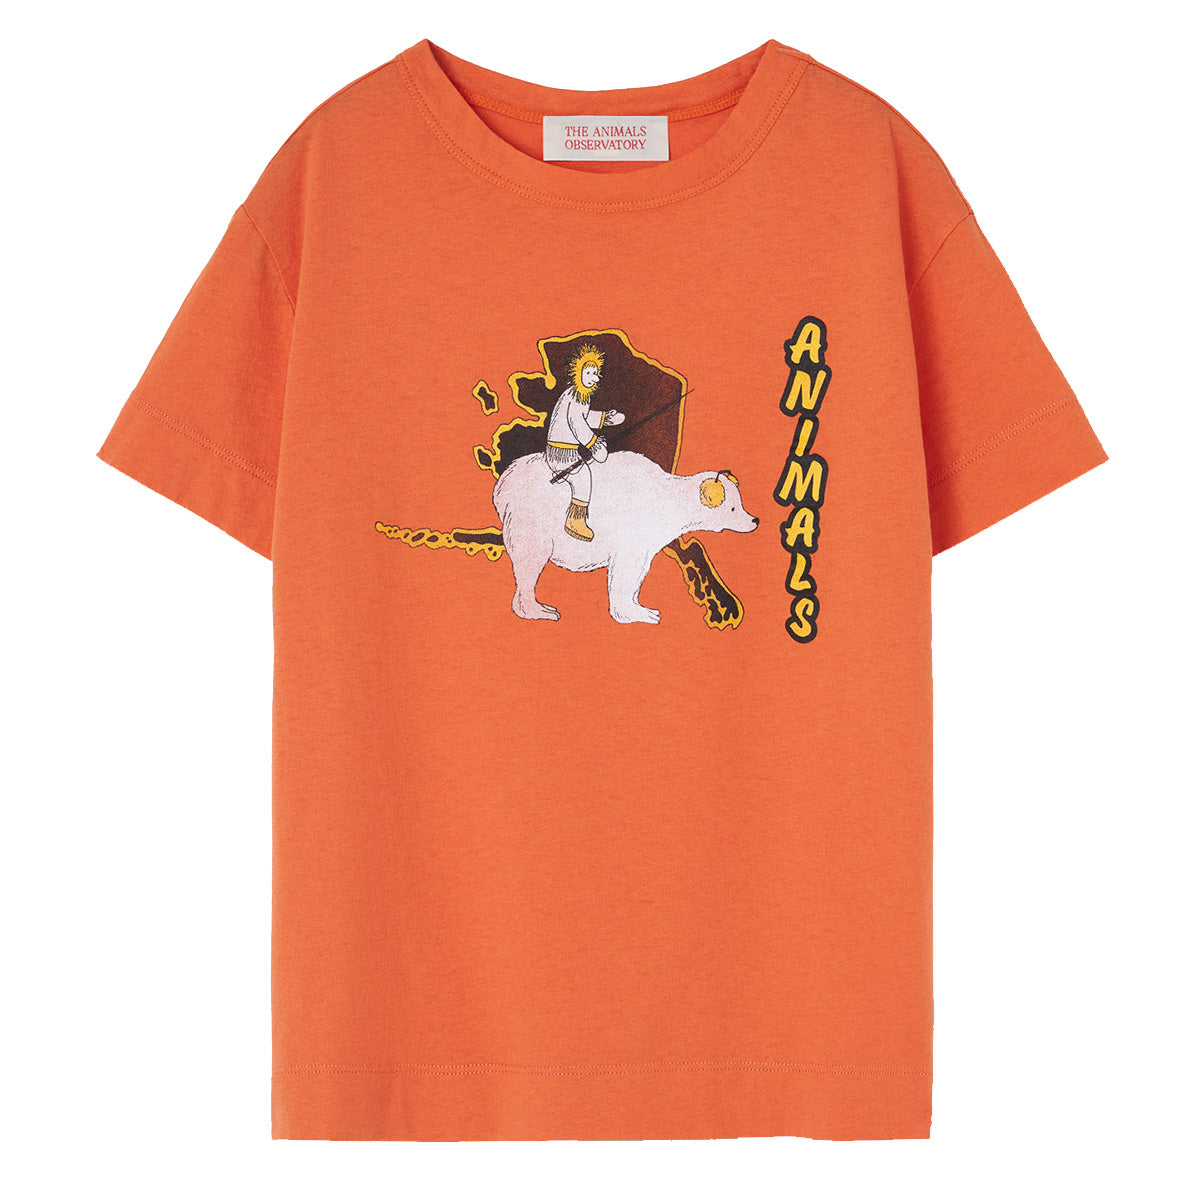 The Rooster Tee from The Animals Observatory in orange color is set on Alaska and lets us meet a friendly Inuit on a polar bear